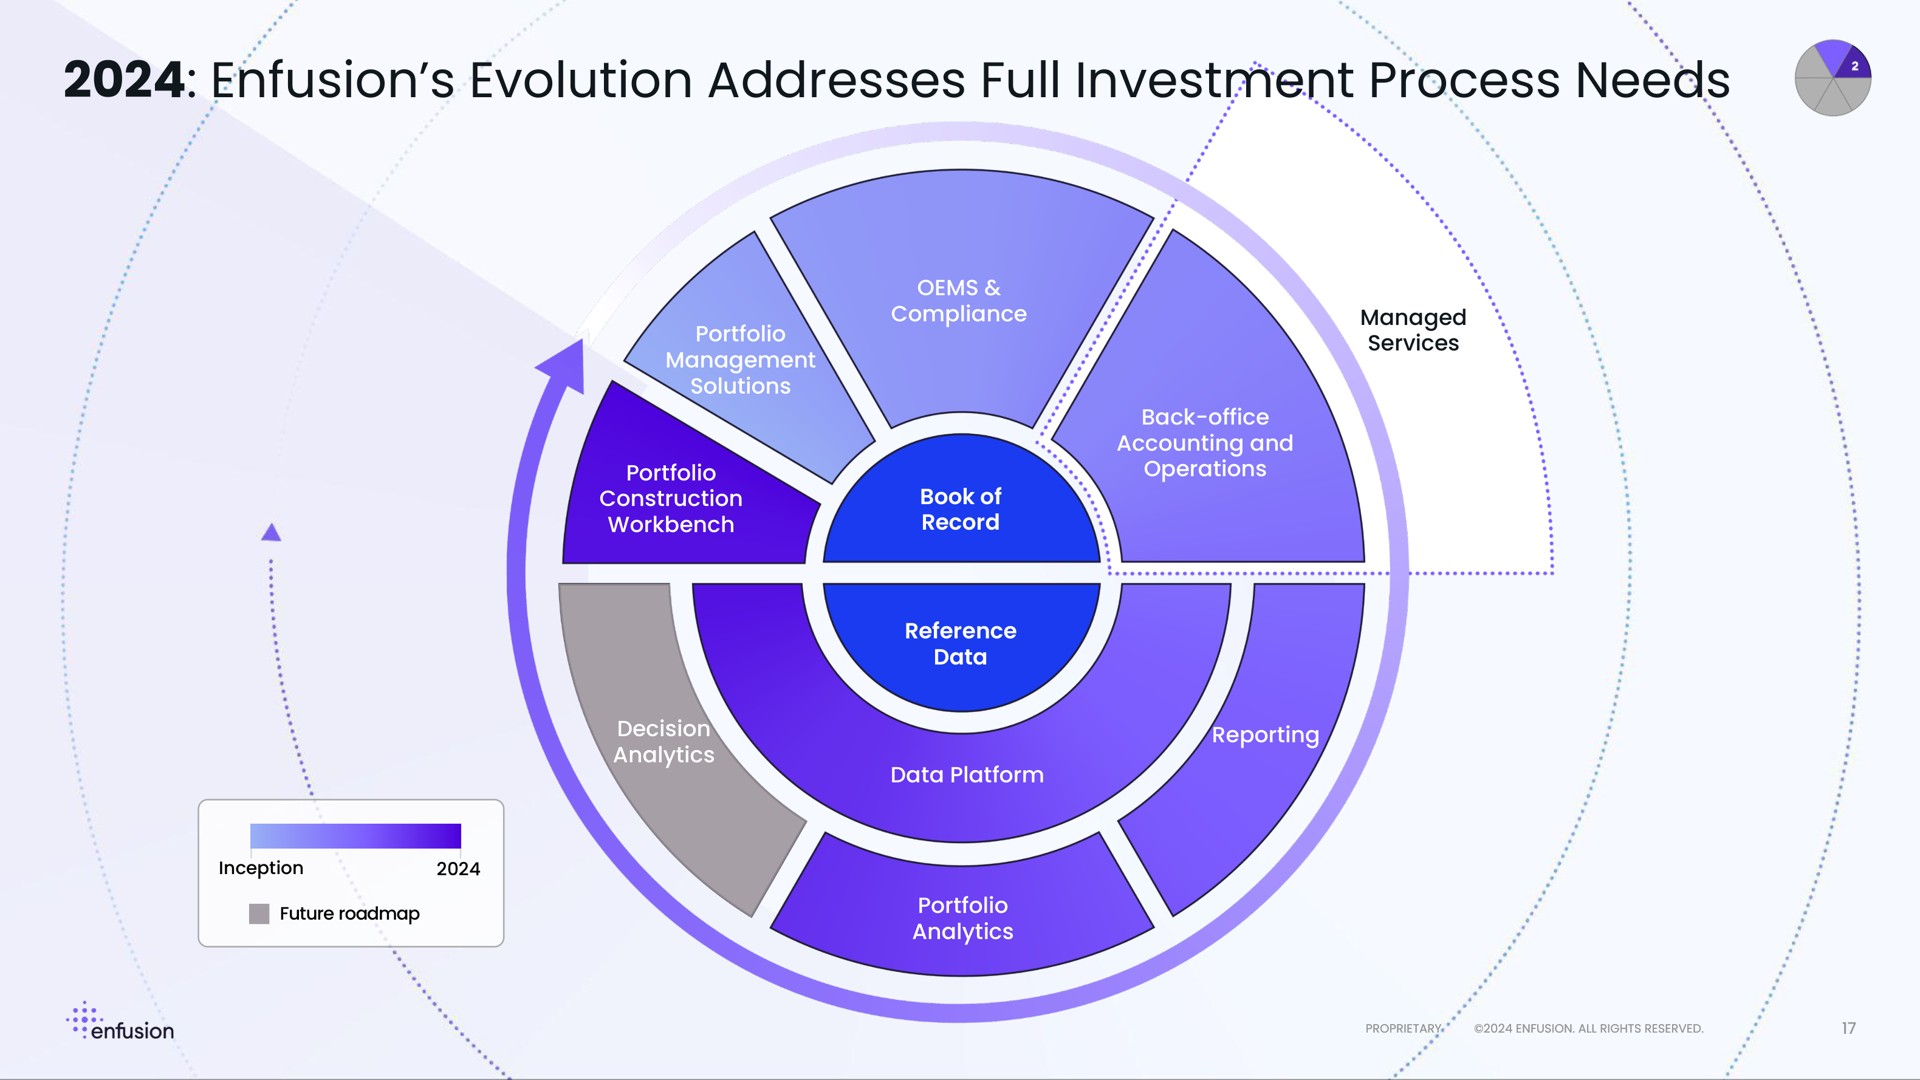 evolution addresses full investment process needs | Enfusion